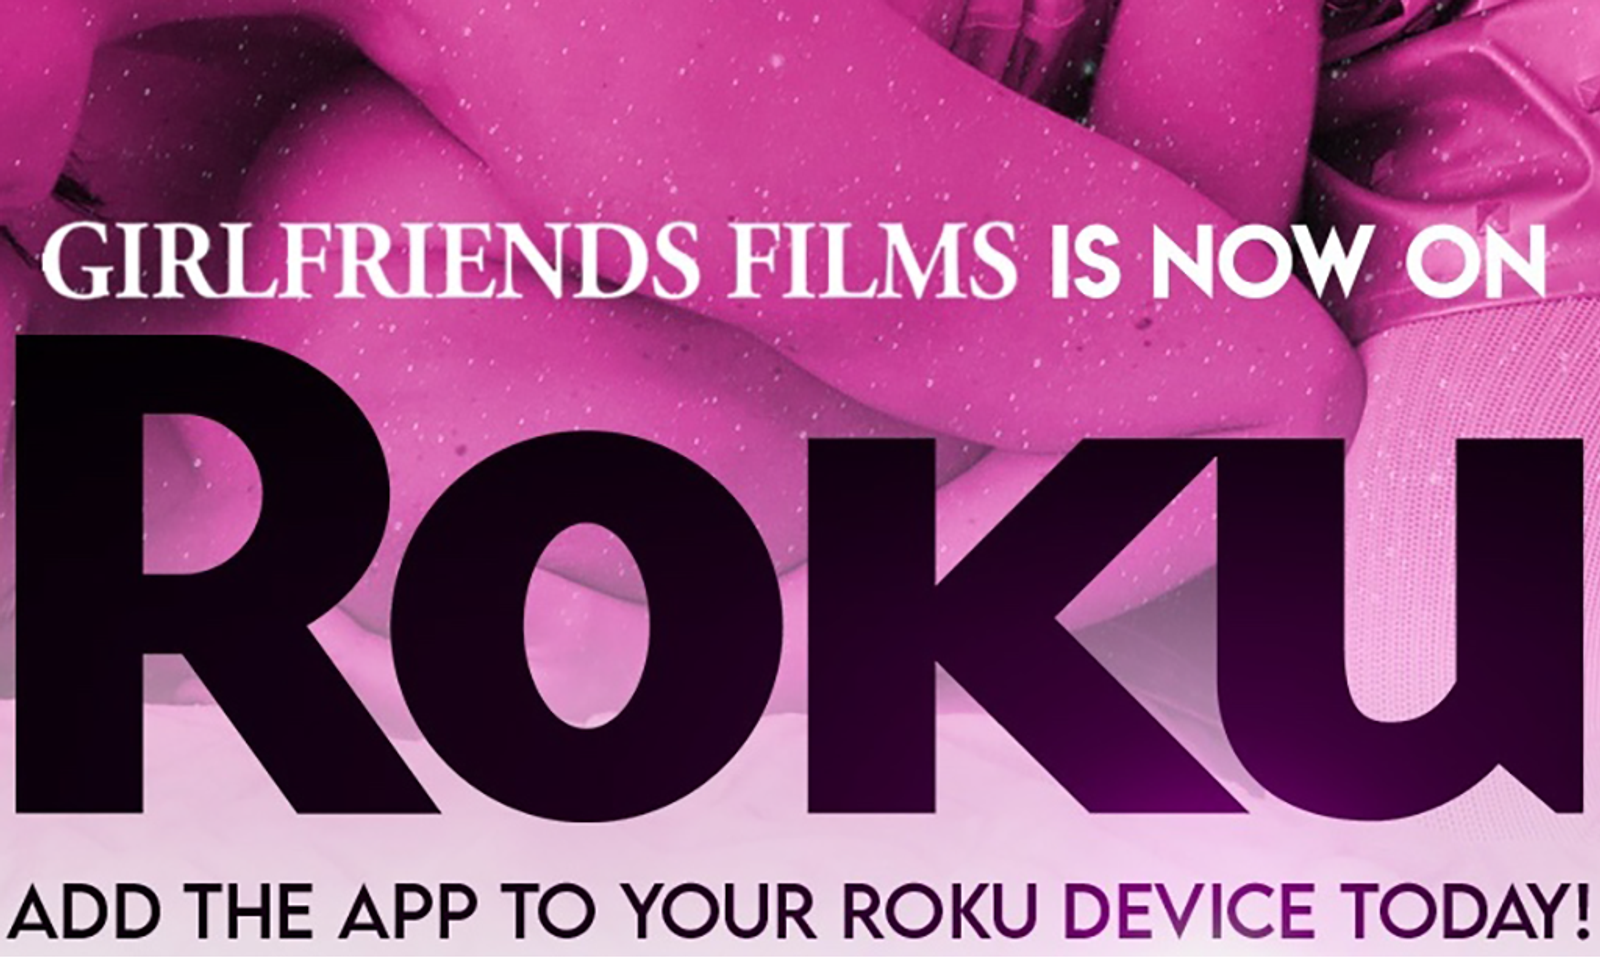 Girlfriends Films' Catalog Is Now Available to Stream on Roku